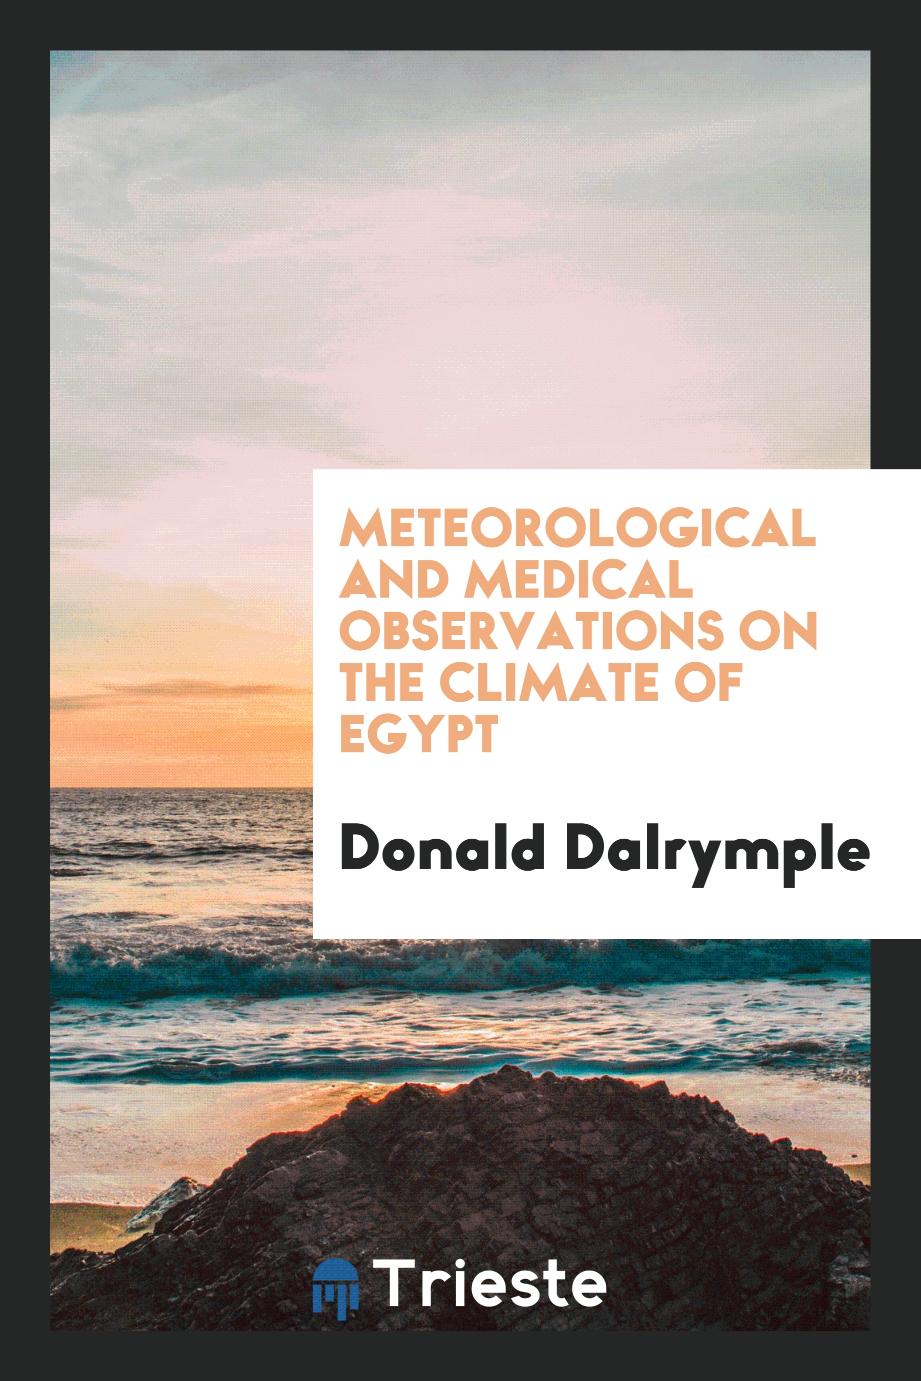 Meteorological and Medical Observations on the Climate of Egypt